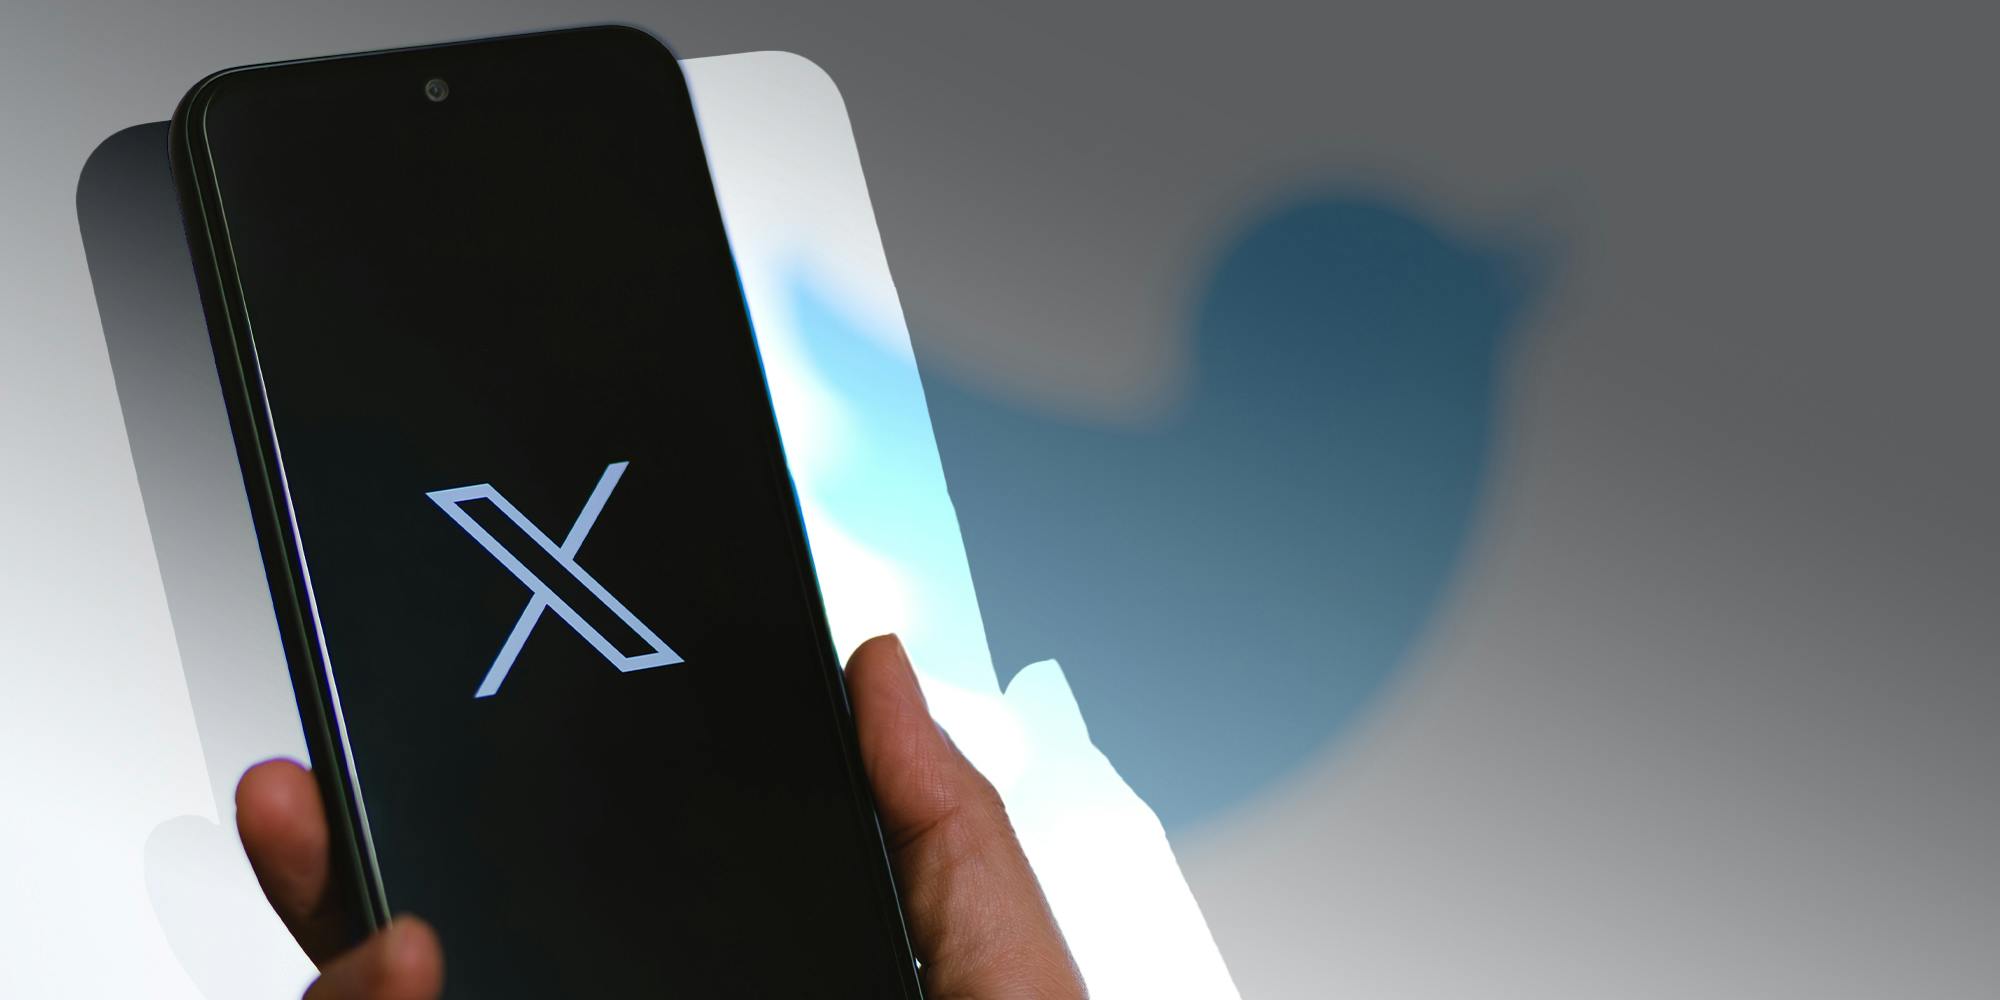 New Twitter X logo. Twitter changed the logo of the application with X. Twitter News. X new social media. Musk monetization fake news.